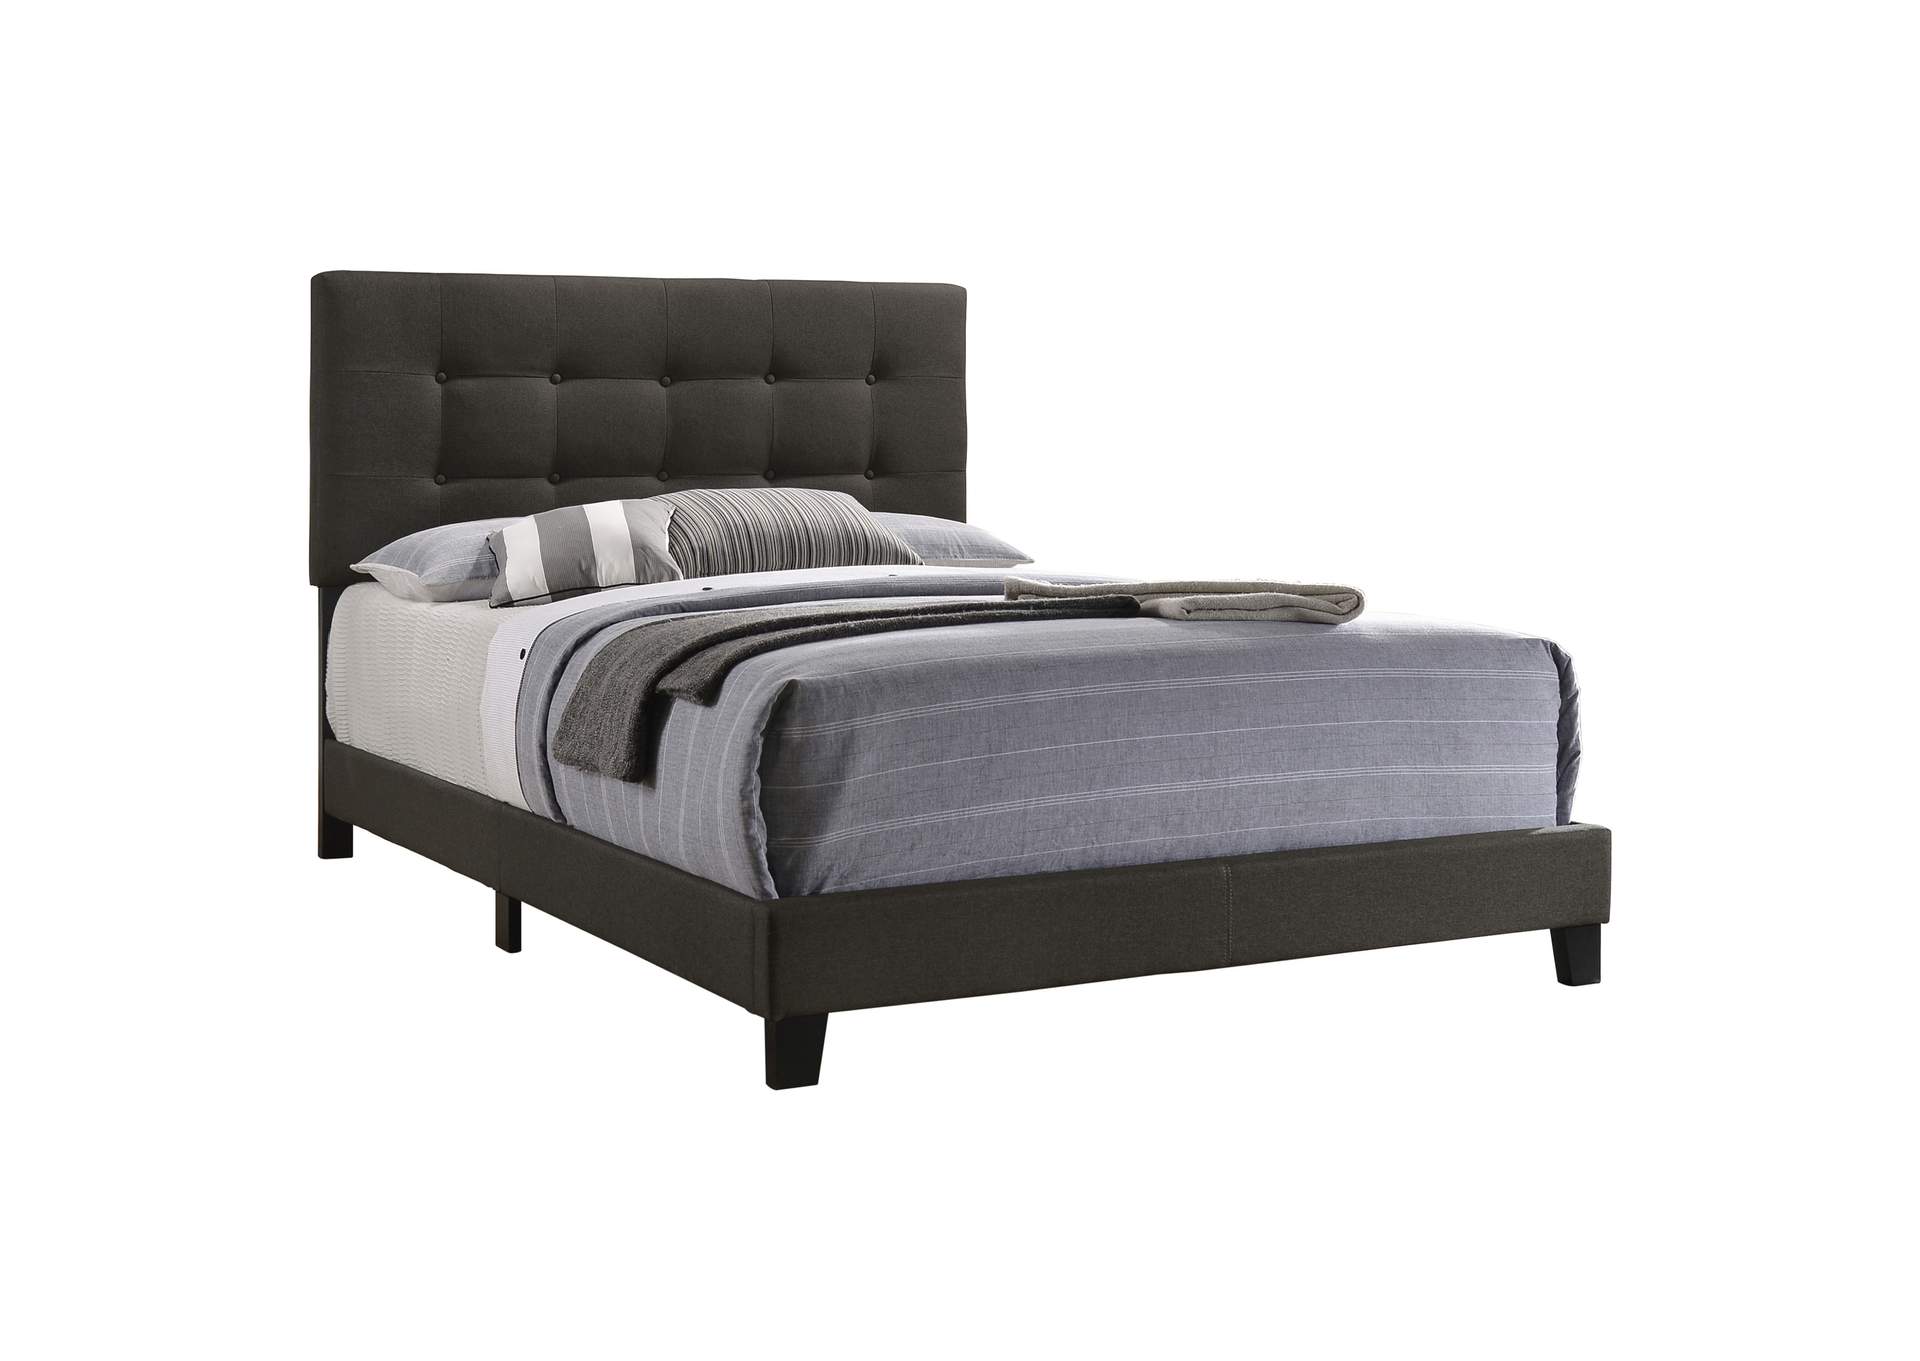 Mapes Tufted Upholstered Queen Bed Charcoal,Coaster Furniture